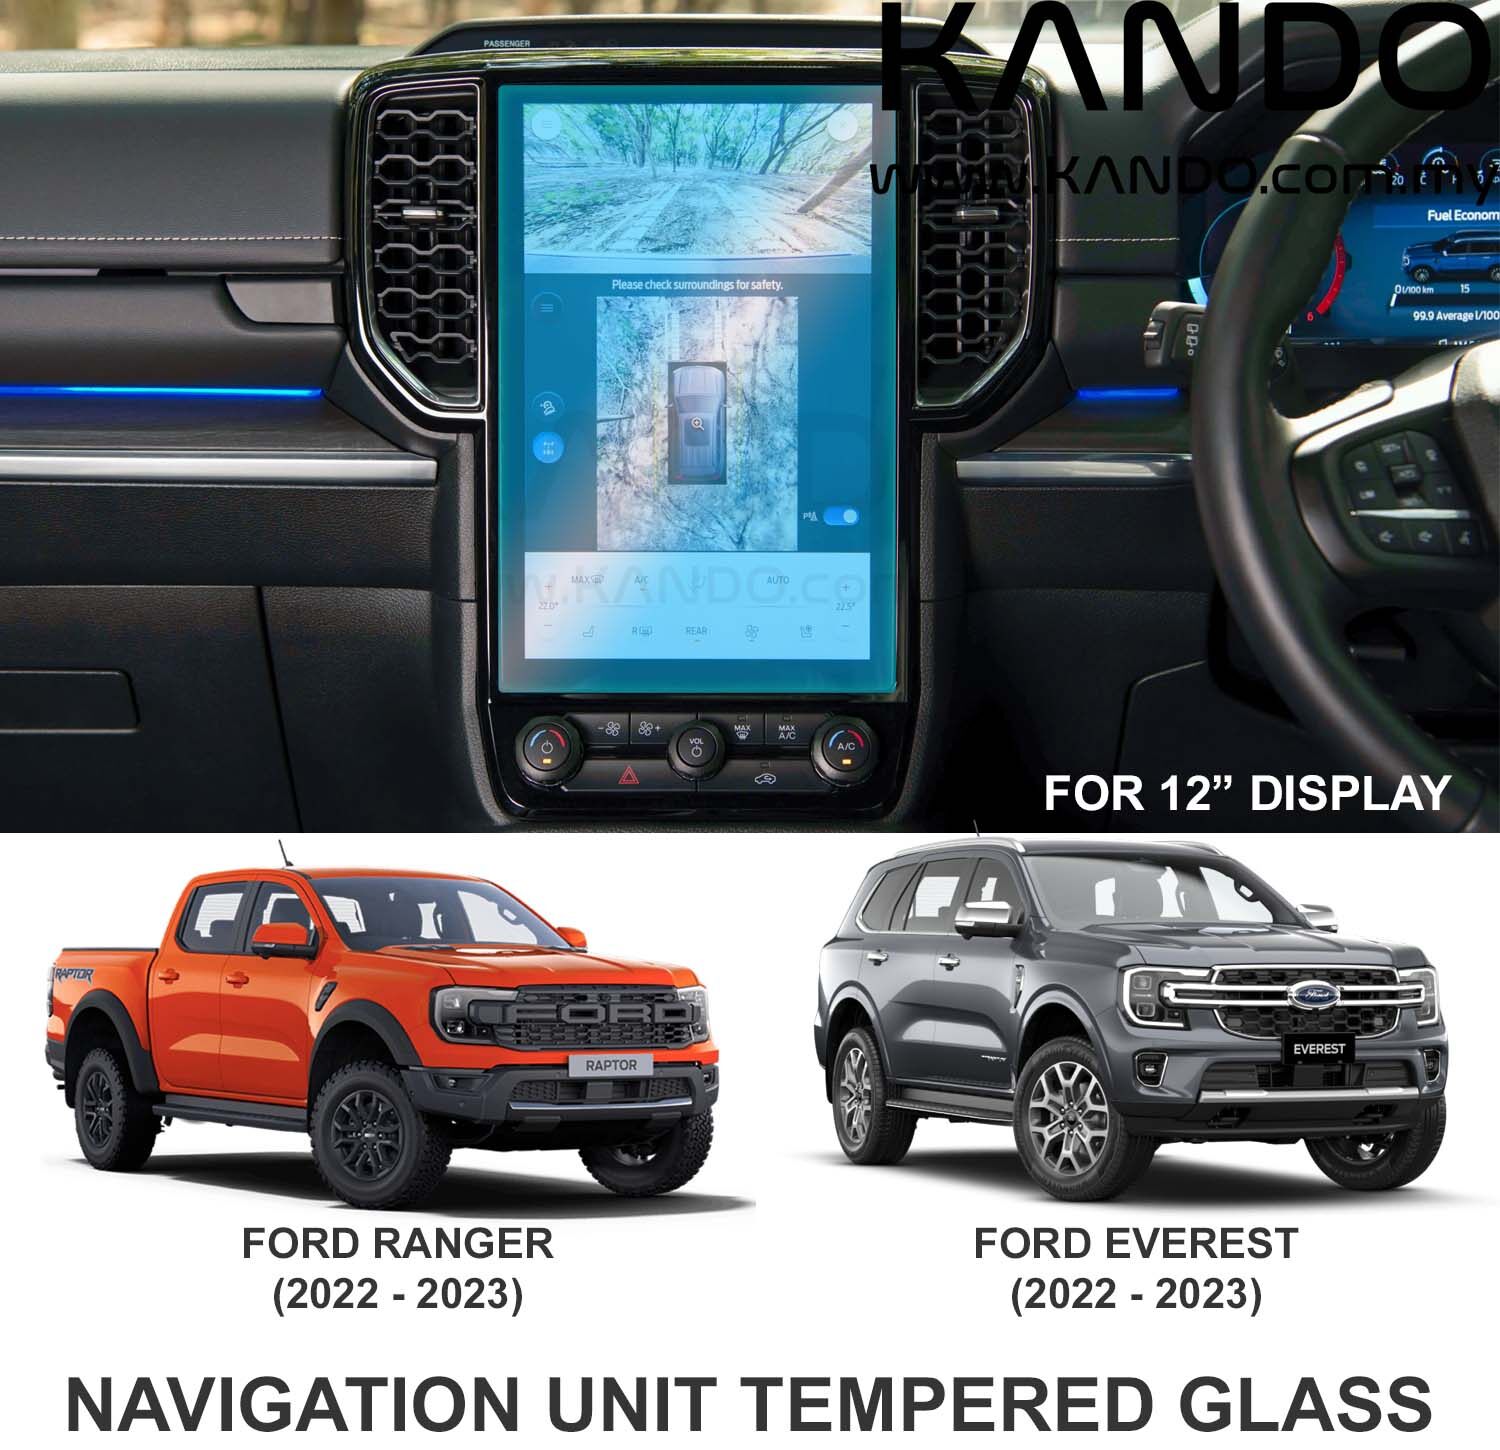 Ford Ranger Tempered Glass Protector Ford Everest Tempered Glass Protector WildTrak Tempered Glass Protector Raptor Tempered Glass Protector Ranger Head Unit Glass Ford Everest GPS Glass Protector Ford Everest Head Unit Glass Protector